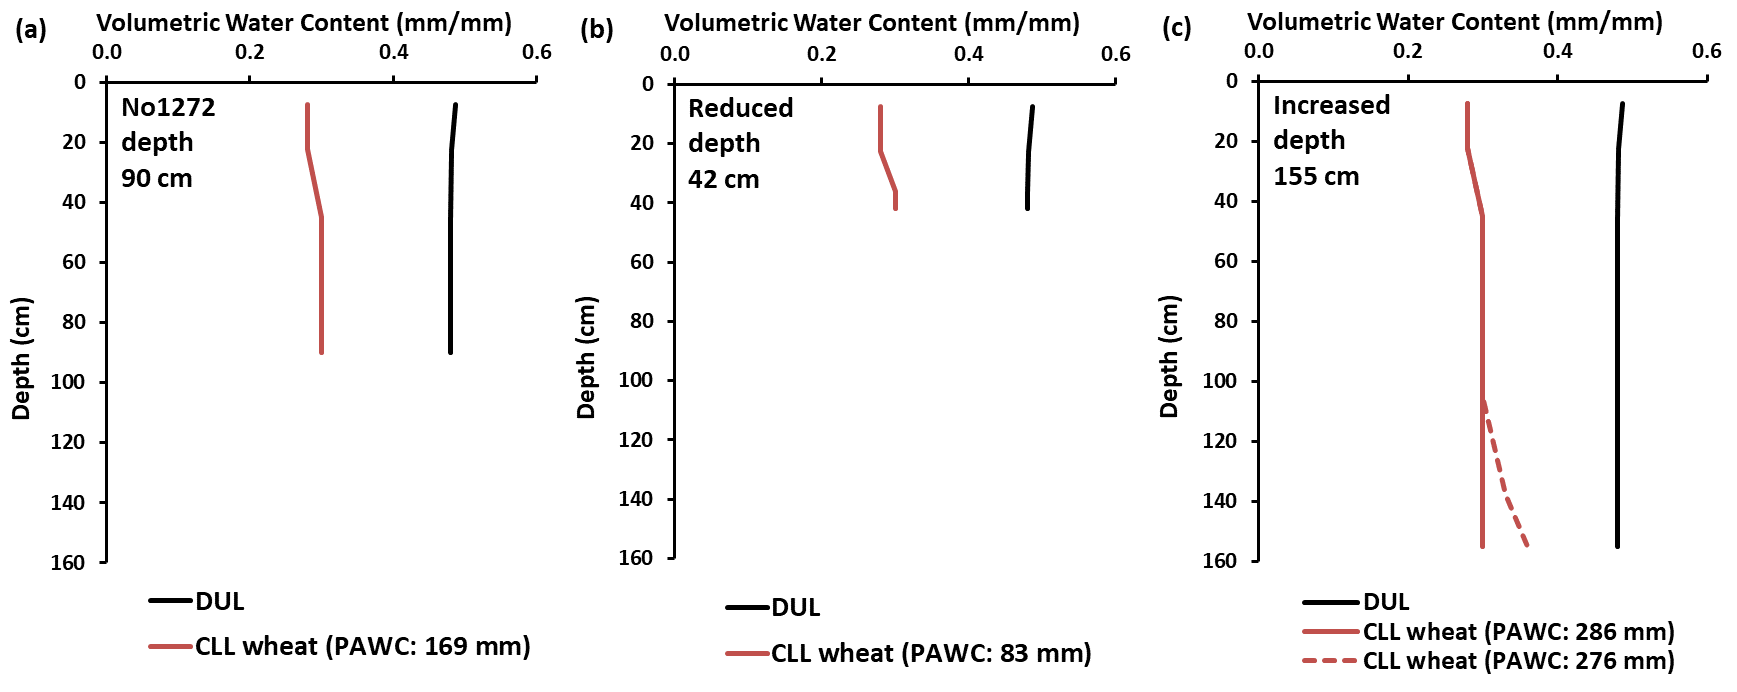 These three line graphs illustrate (a) APSoil No1272 and depth adjusted profiles for soil depths of (b) 42 cm and (c) 155 cm; with deeper profiles the CLL may need to be tapered a little to adjust for reduced rooting at depth.